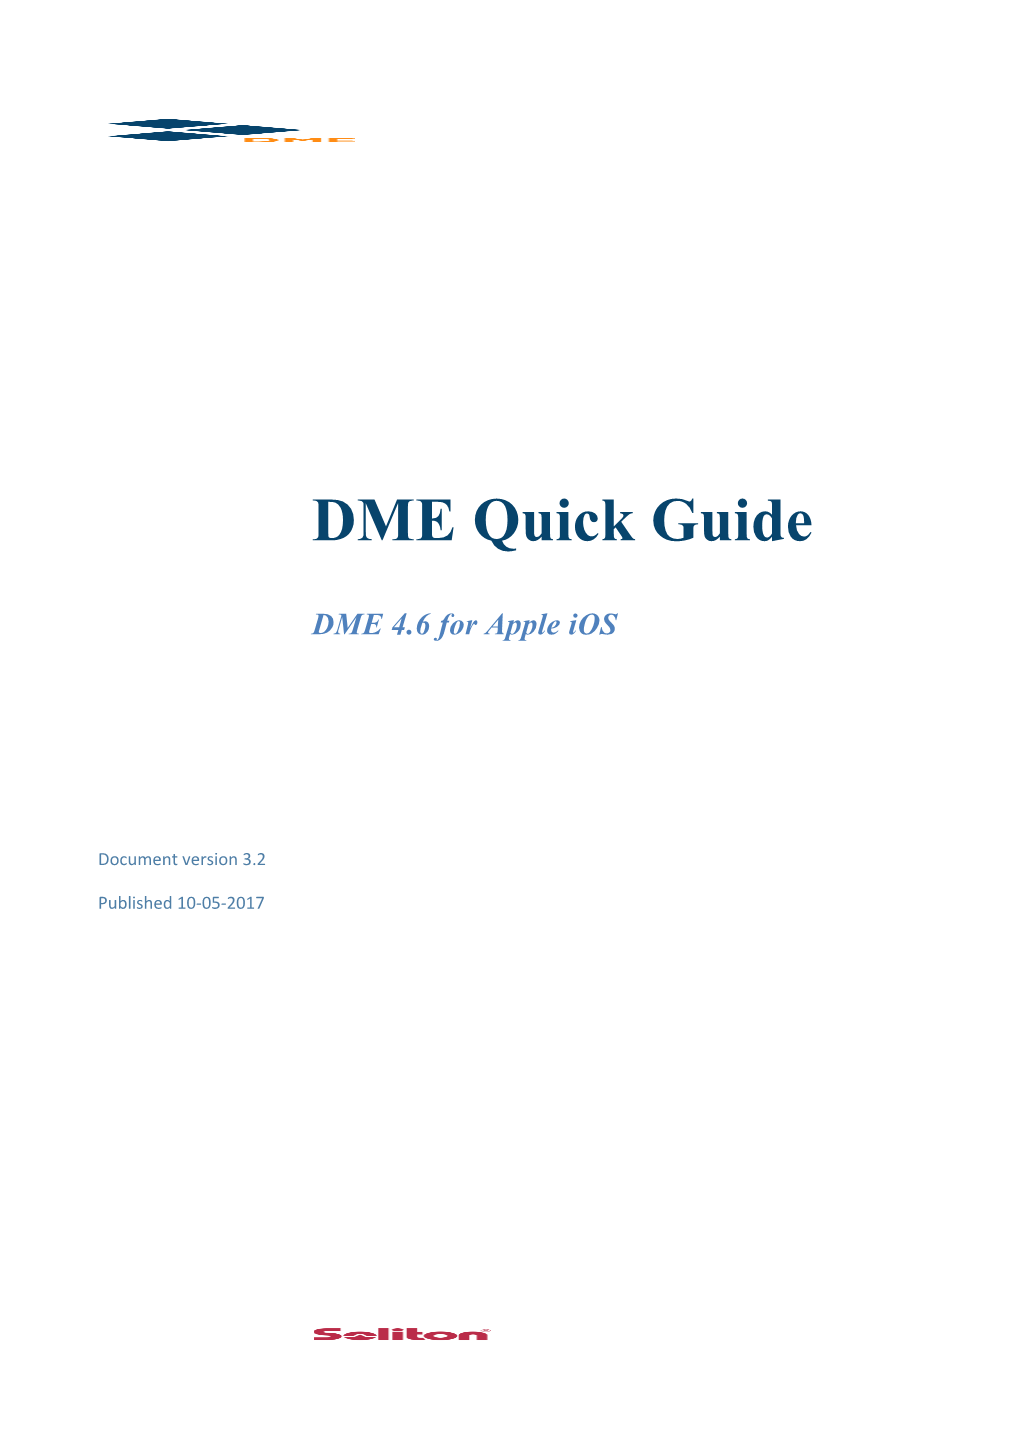 DME Quick Guide